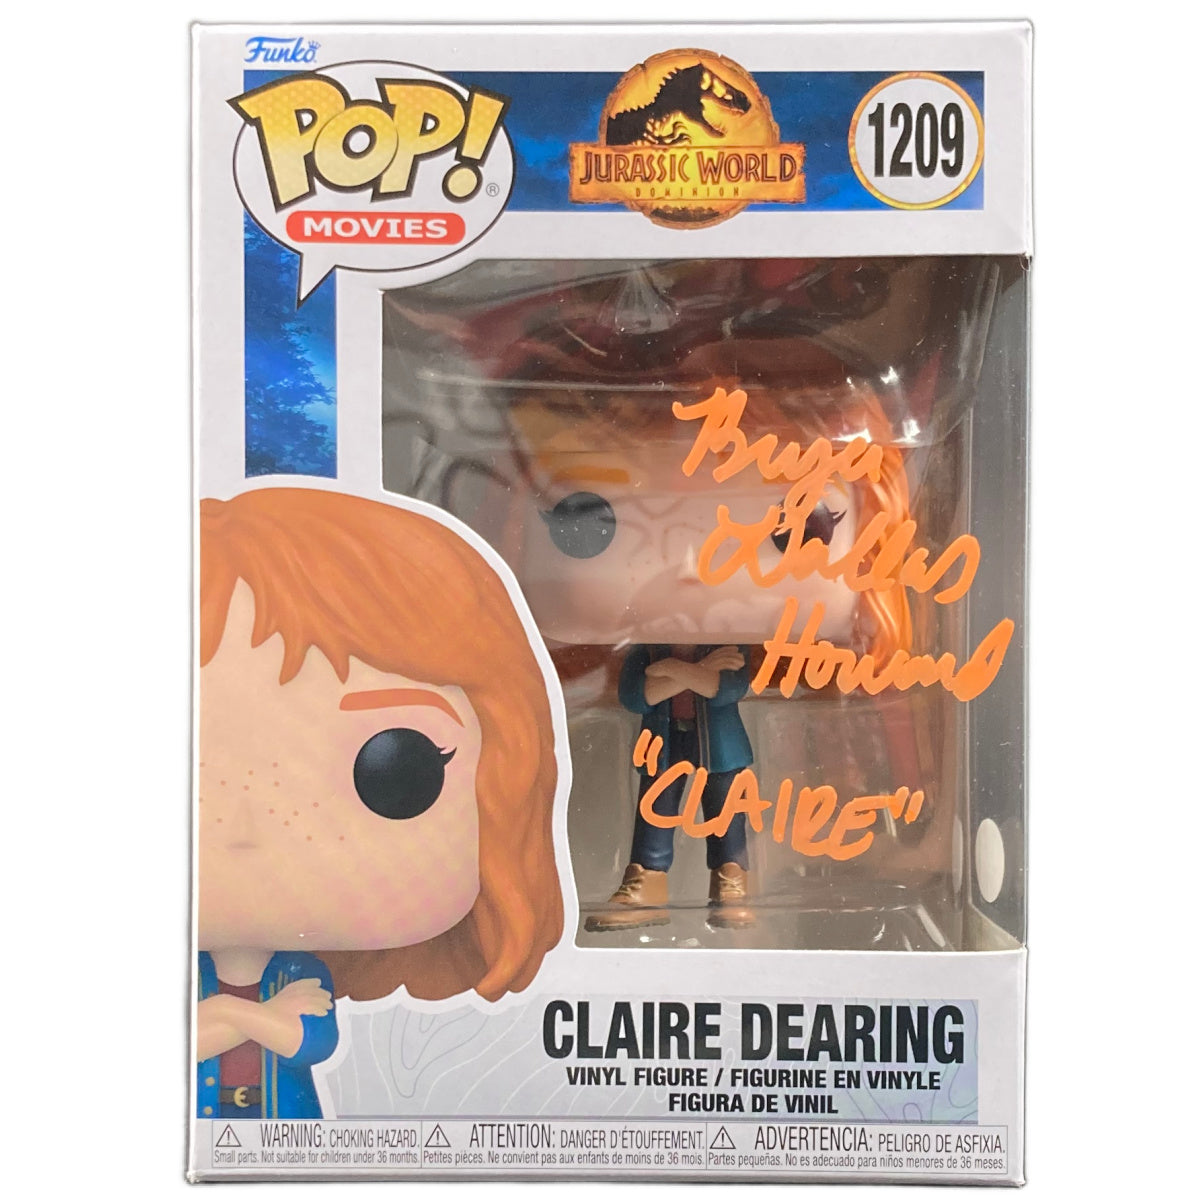 Dallas Bryce Howard Signed Funko POP Jurassic World Claire Dearing Autographed JSA O